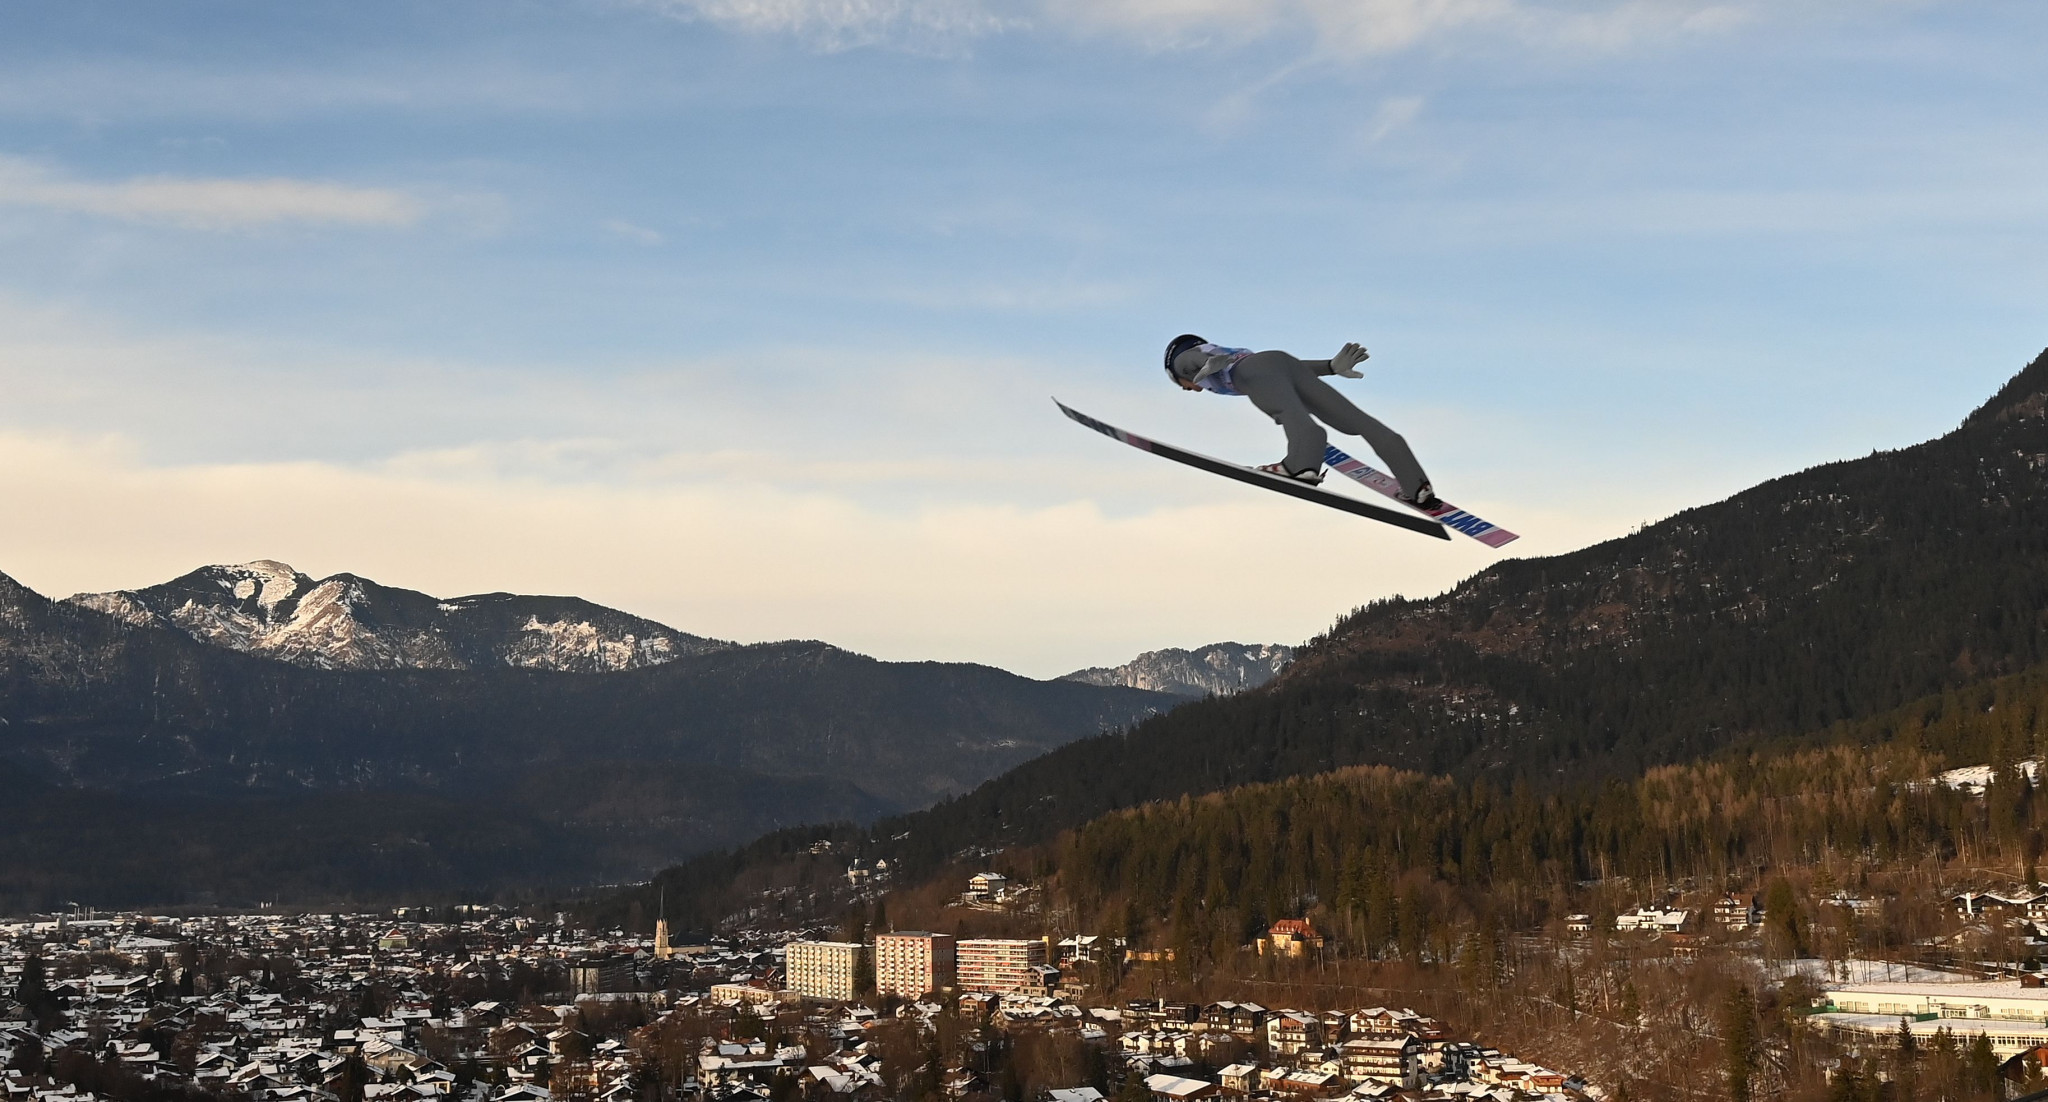 The Four Hills tournament could extend to women's ski jumping in 2023 ©Getty Images